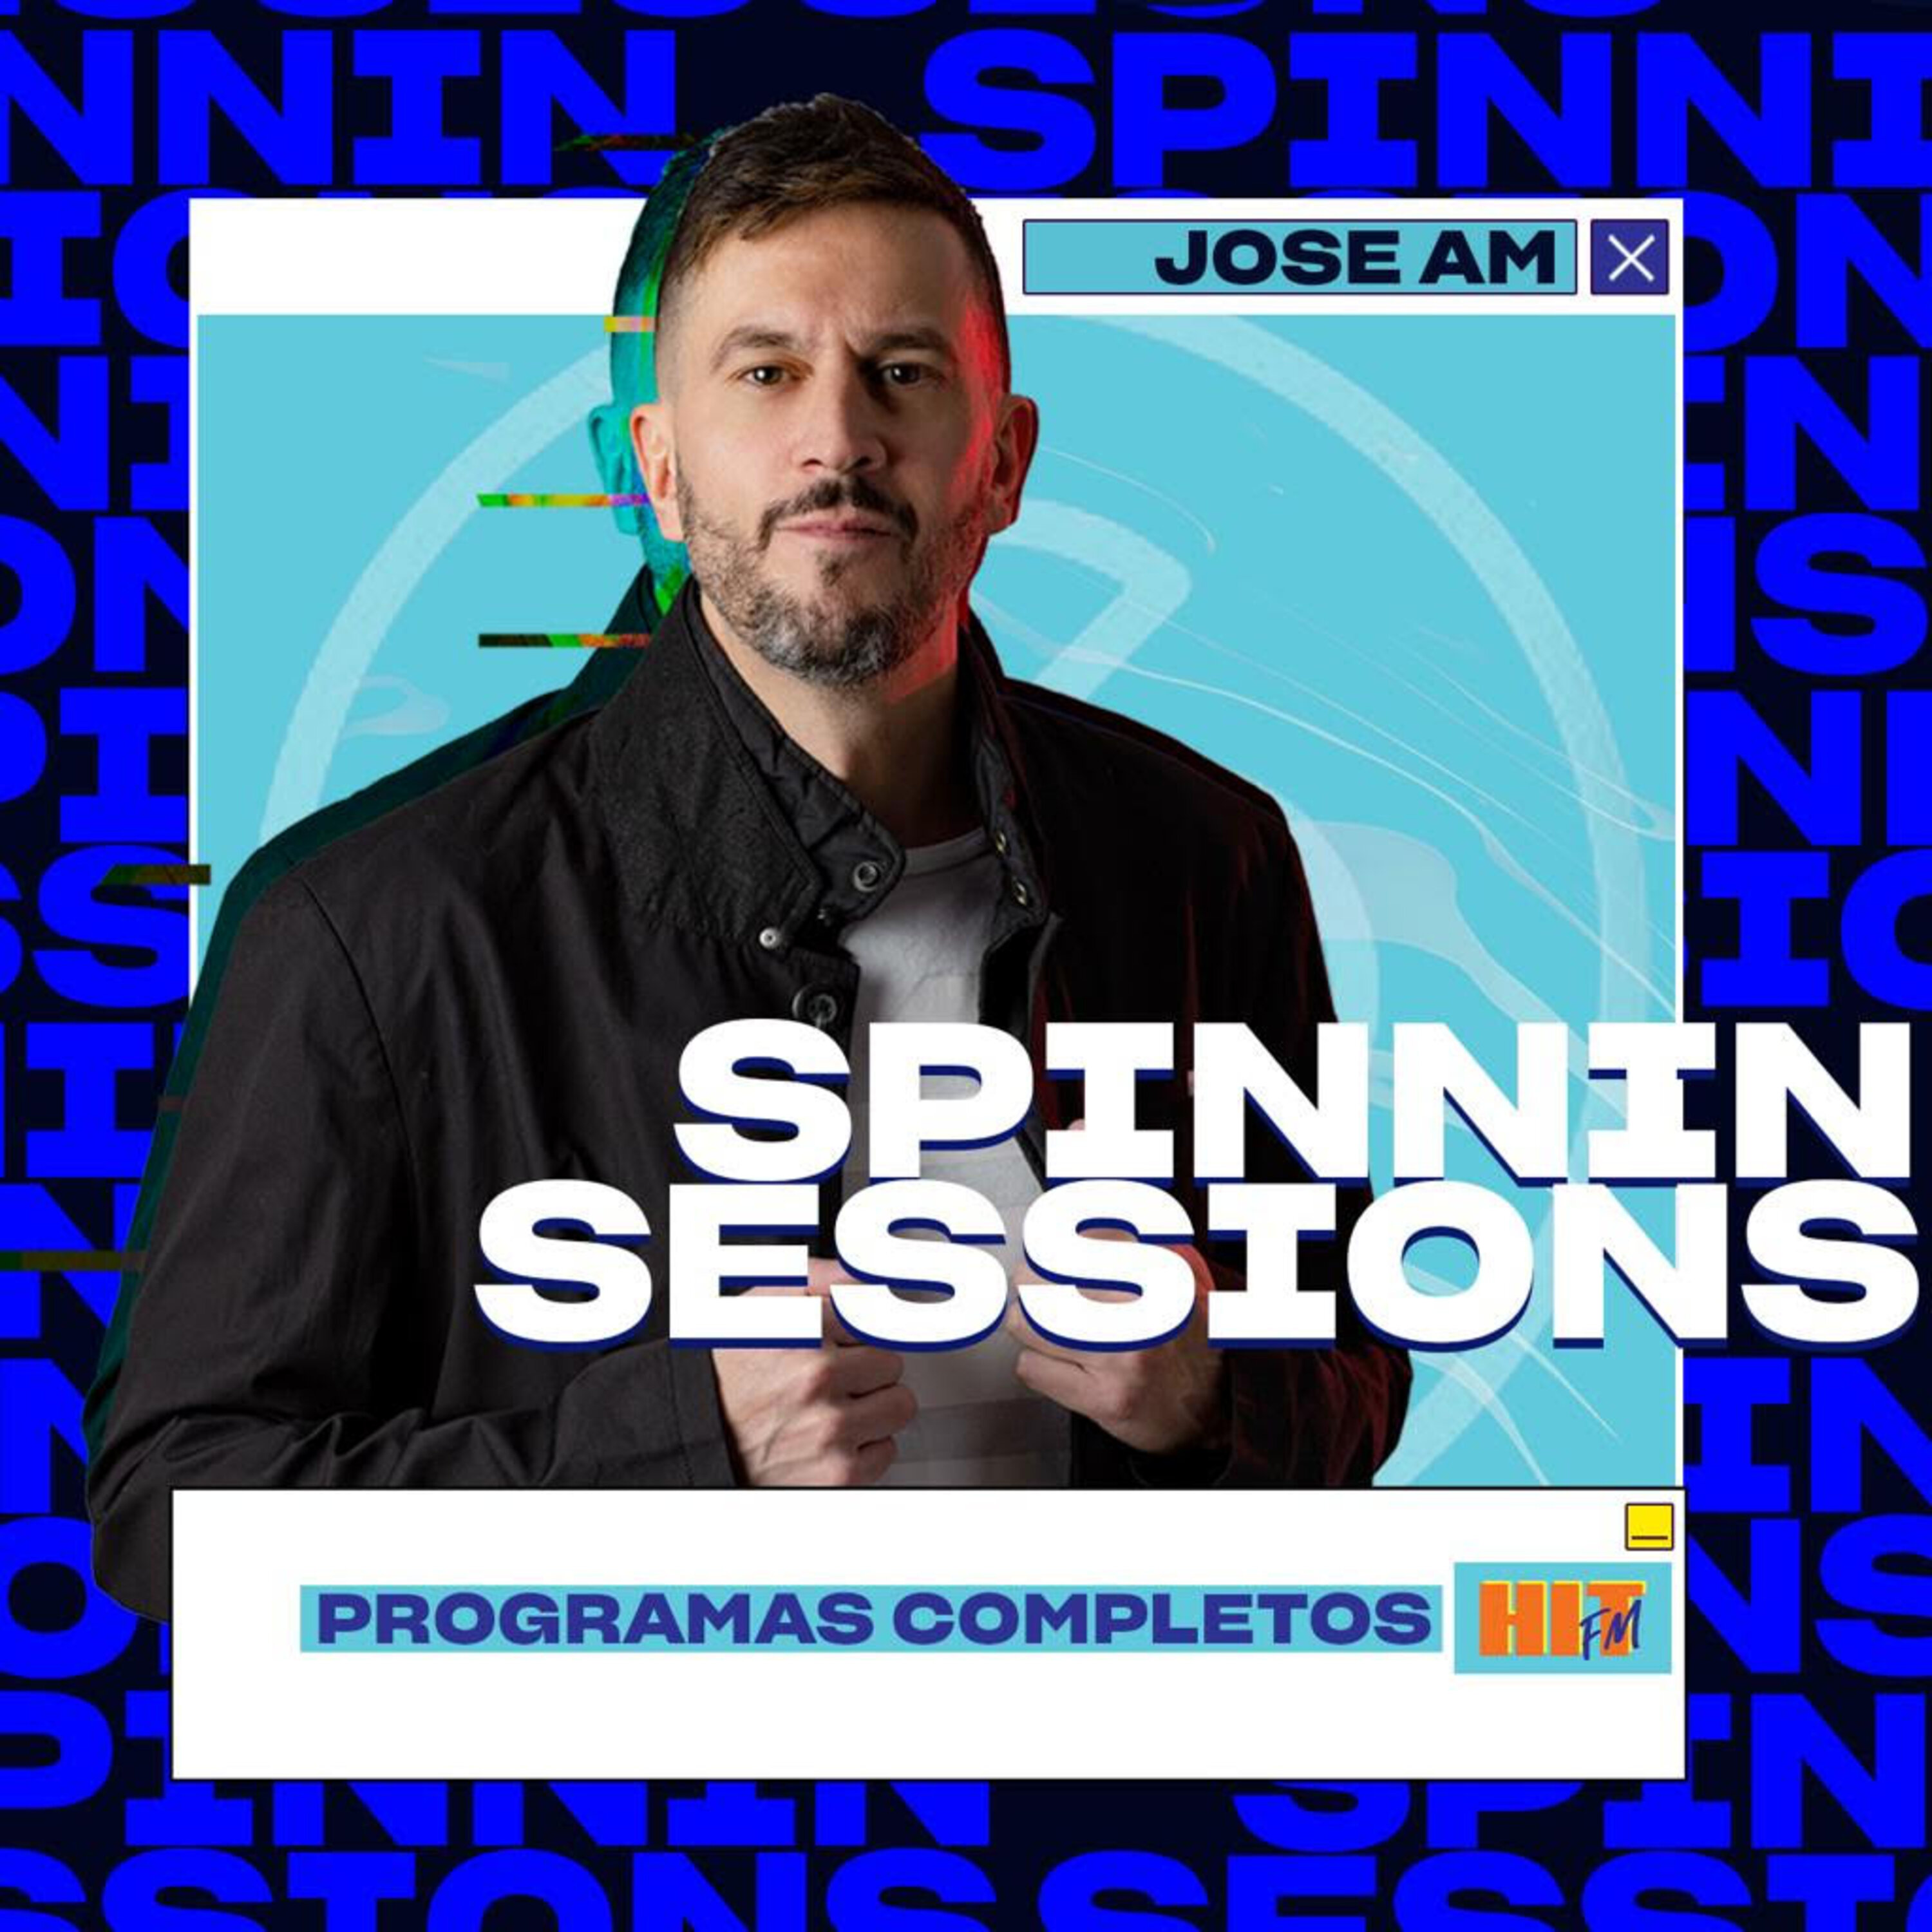 Spinnin Sessions con Jose Am (19/12/2021)